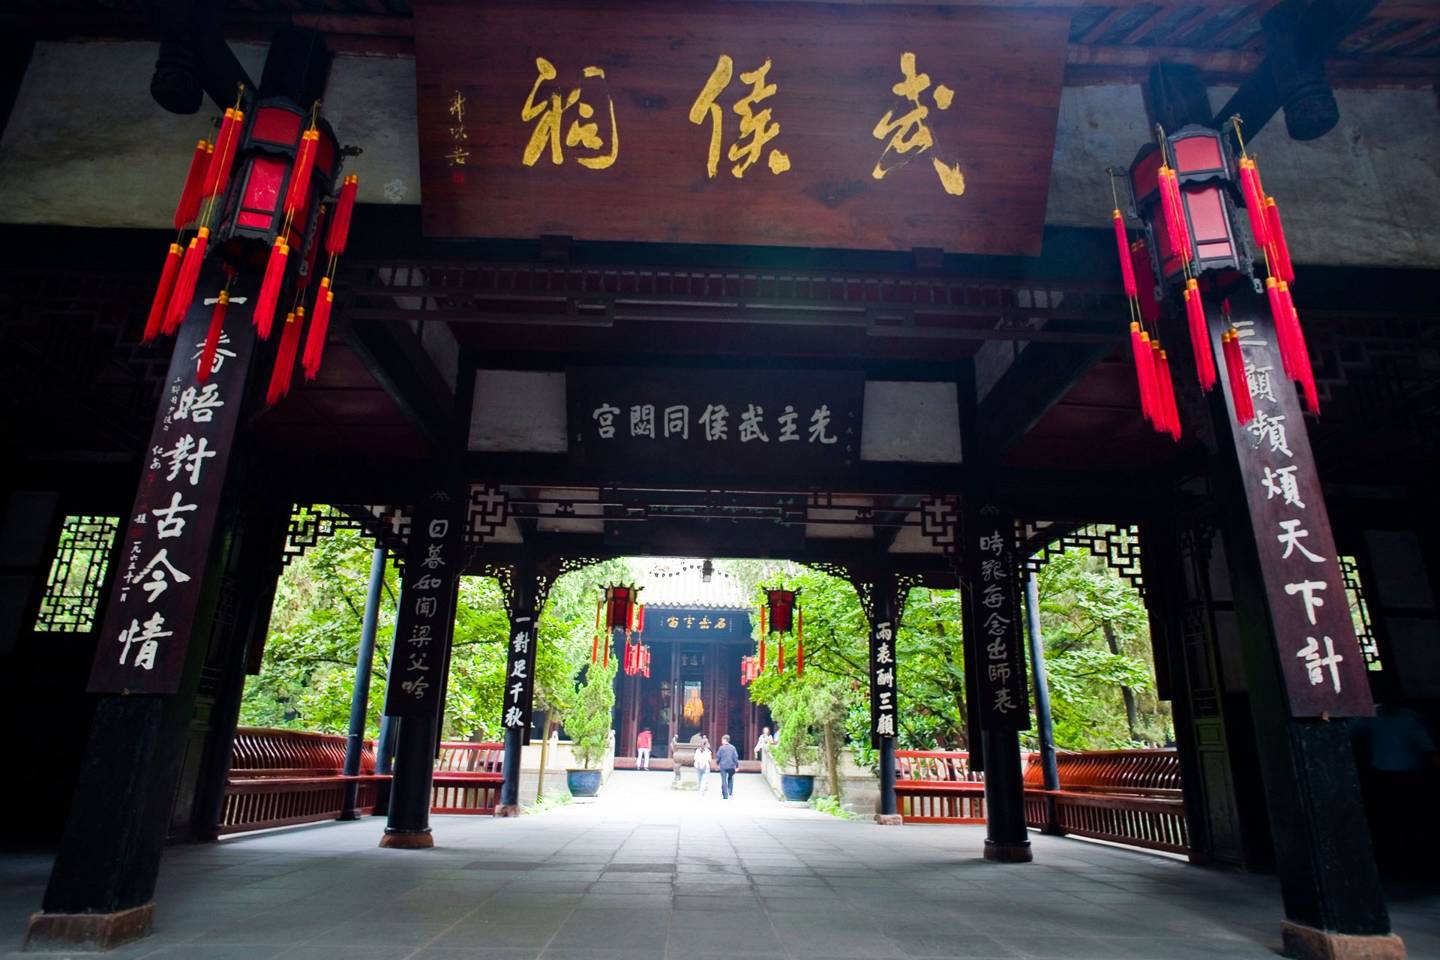 Places to stay and eat in Chengdu, China | CN Traveller